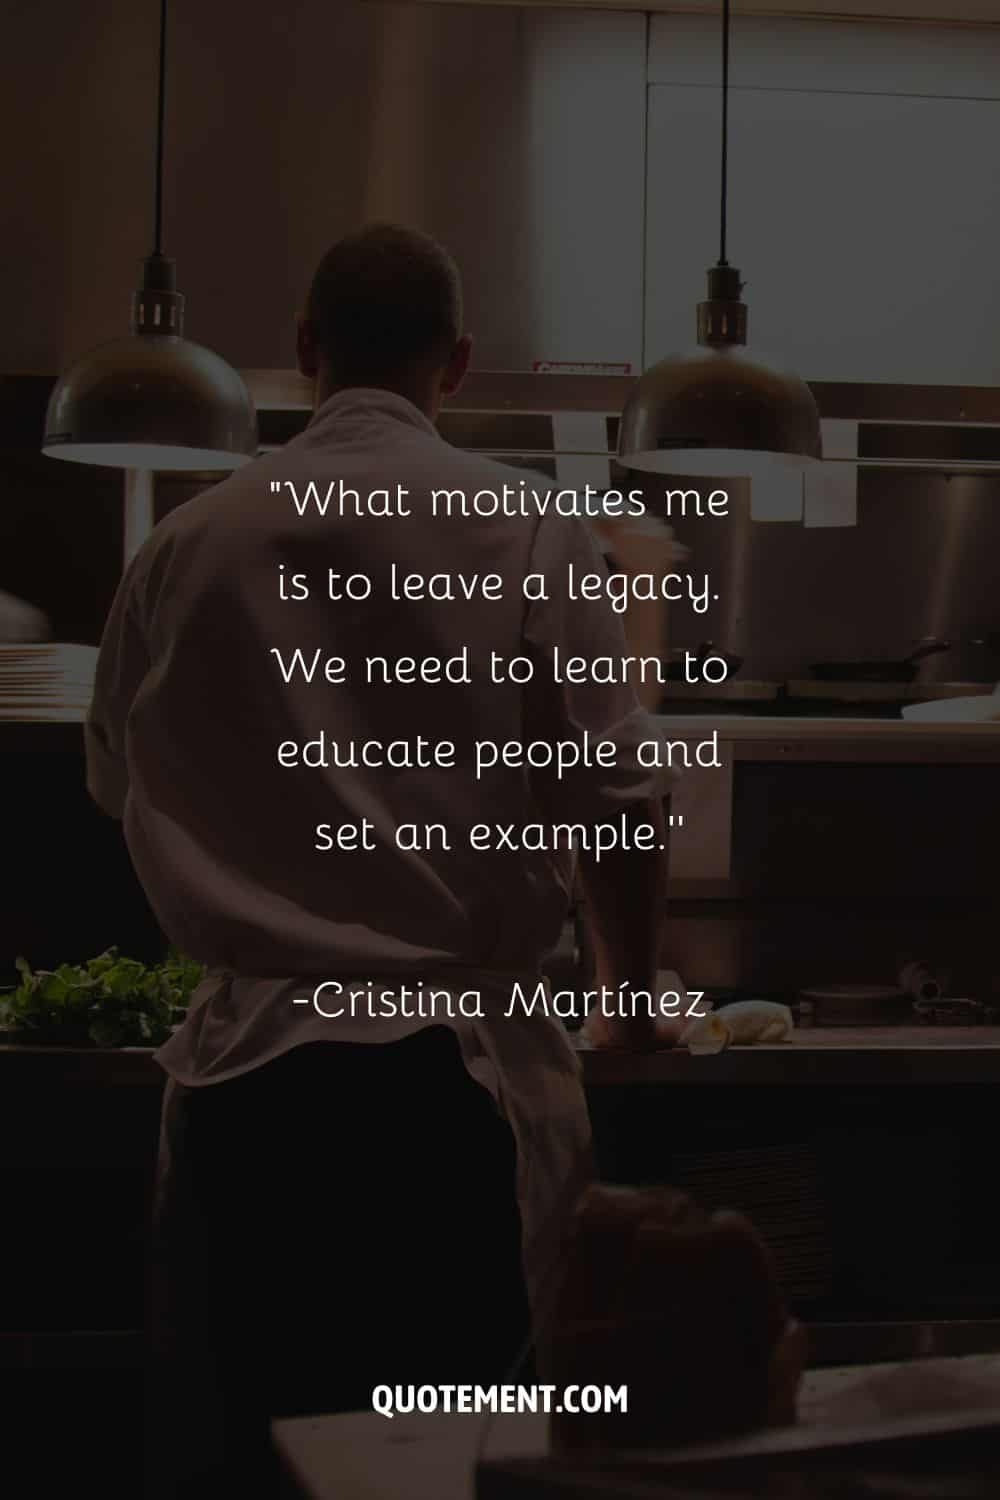 Image of a chef creating gastronomic delights representing a motivational restaurant quote